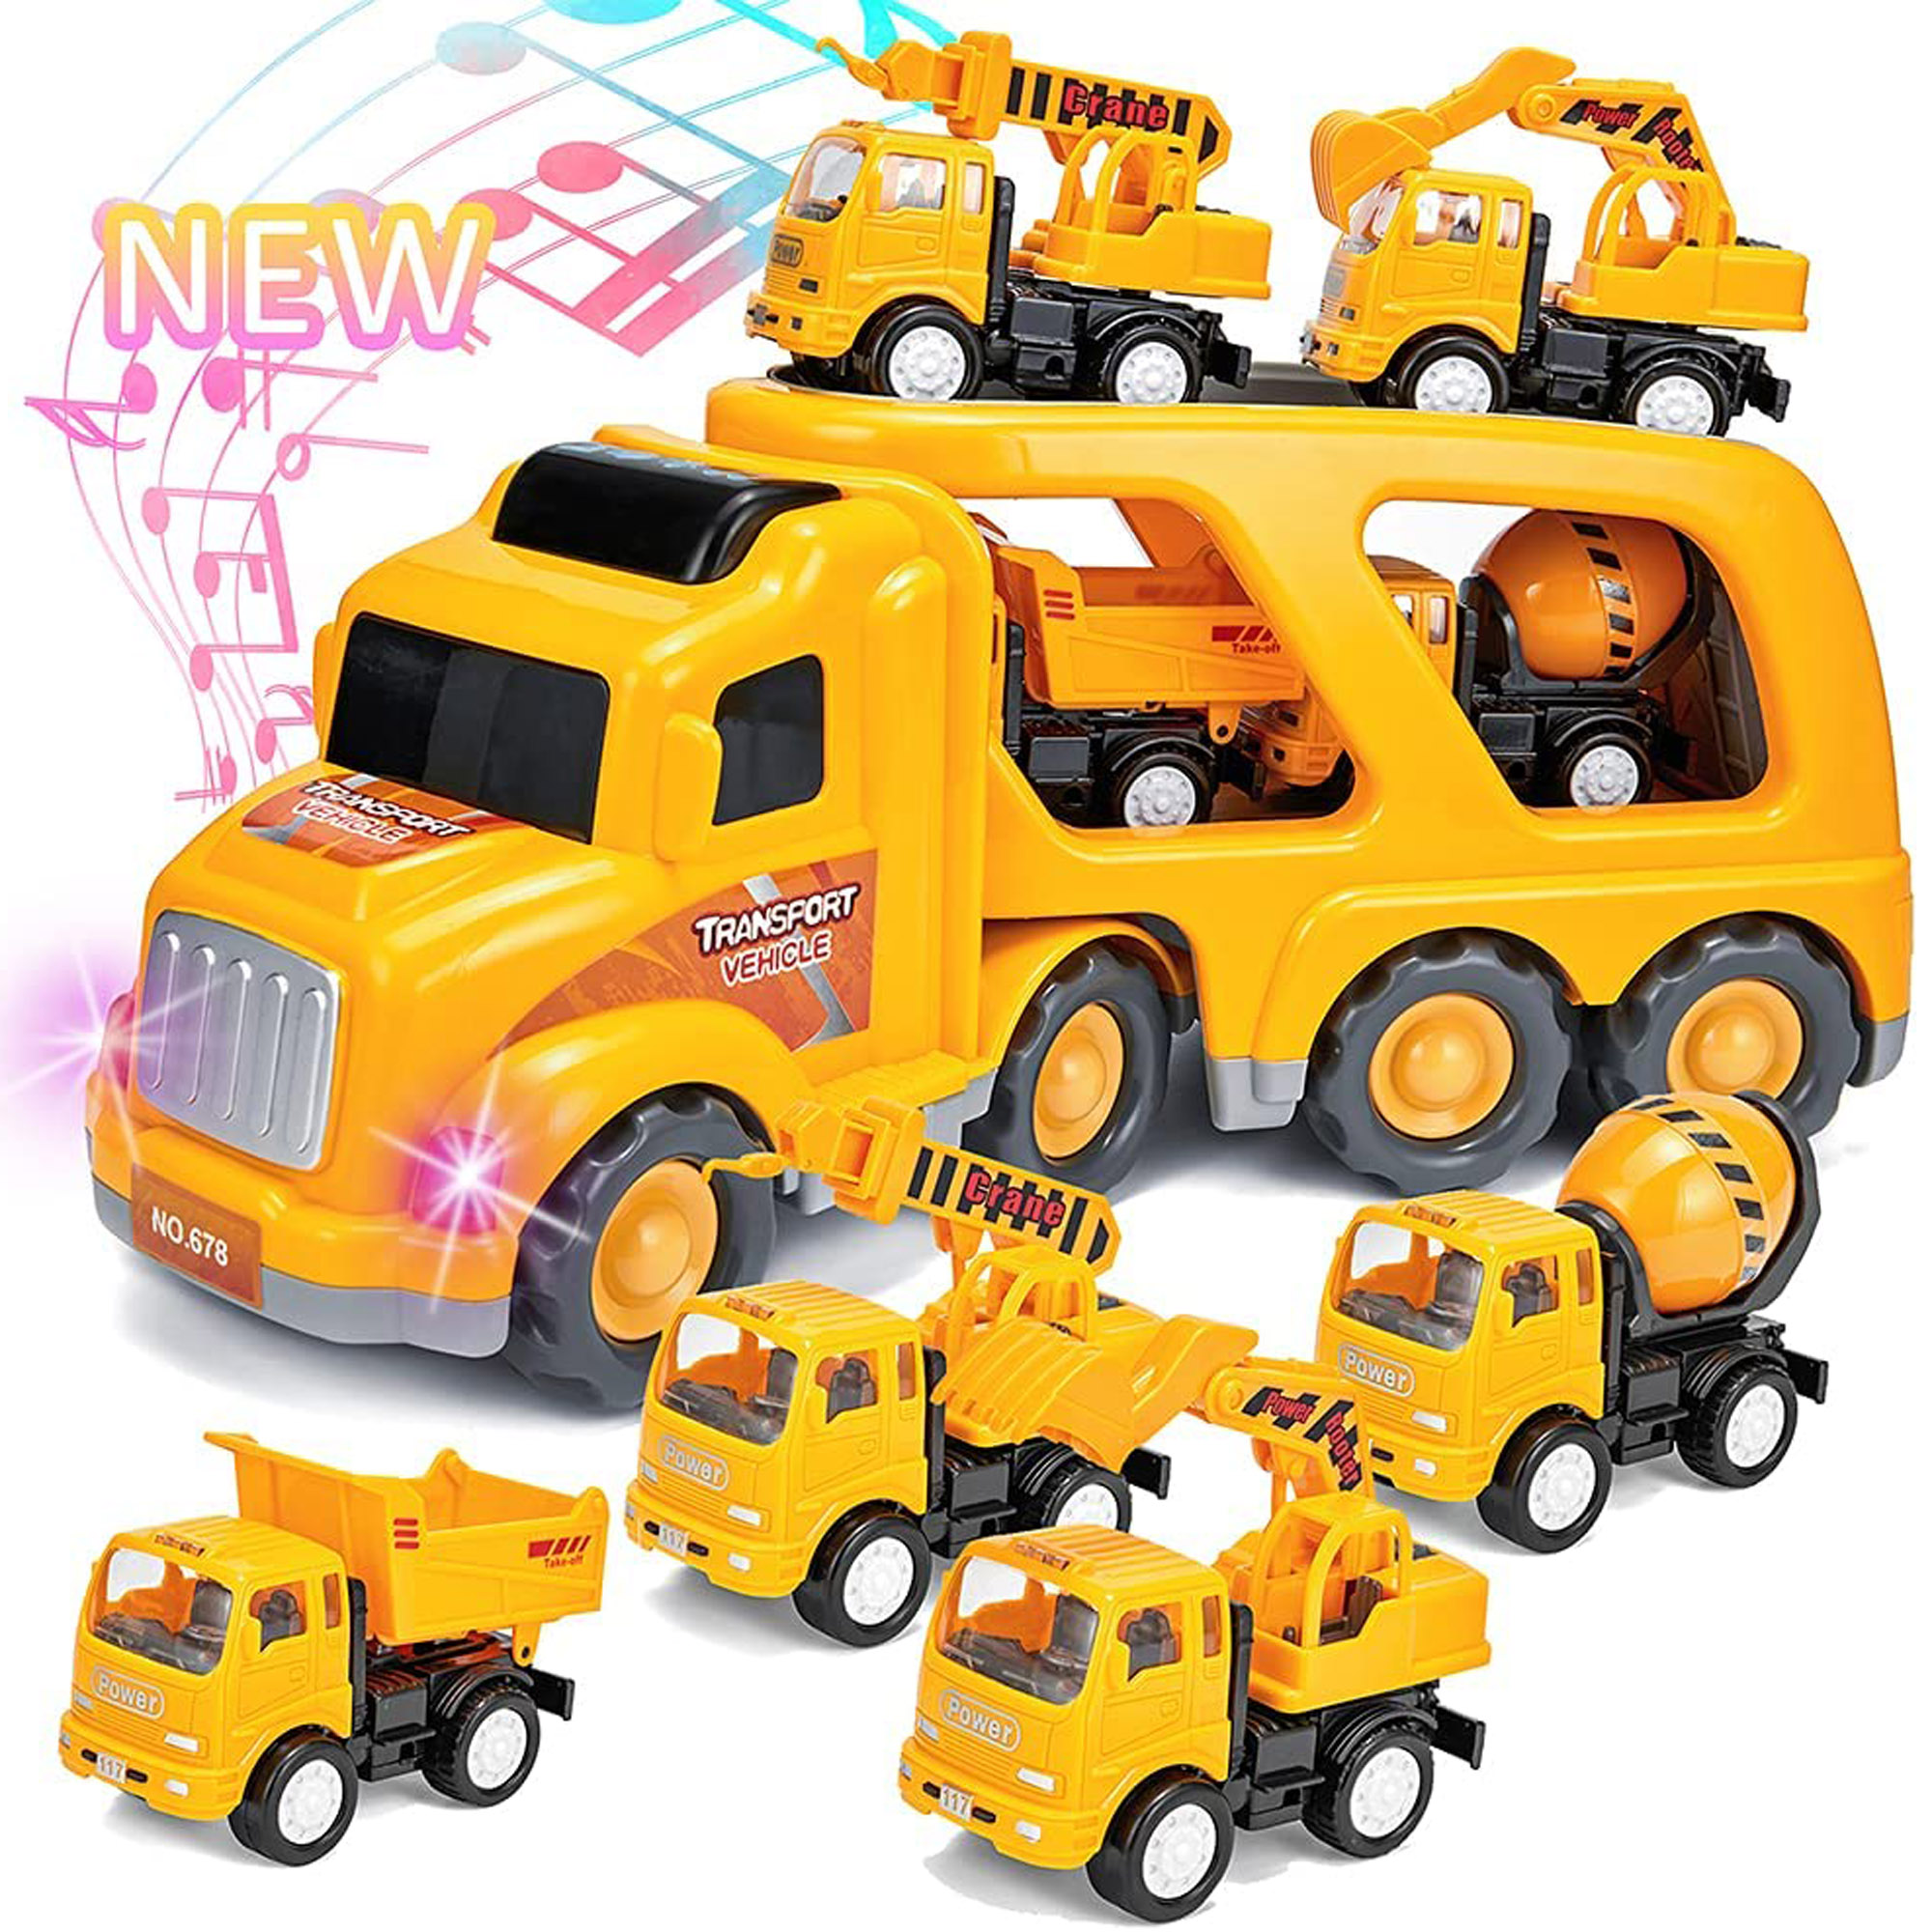 DODOING 5 in 1 Construction Truck Toys Vehicles Set,Transport Truck Carrier Toy with Excavator Mixer Crane Dump, Real Siren Brake Sounds & Lights, Removable Engineering Vehicle Parts - image 1 of 7